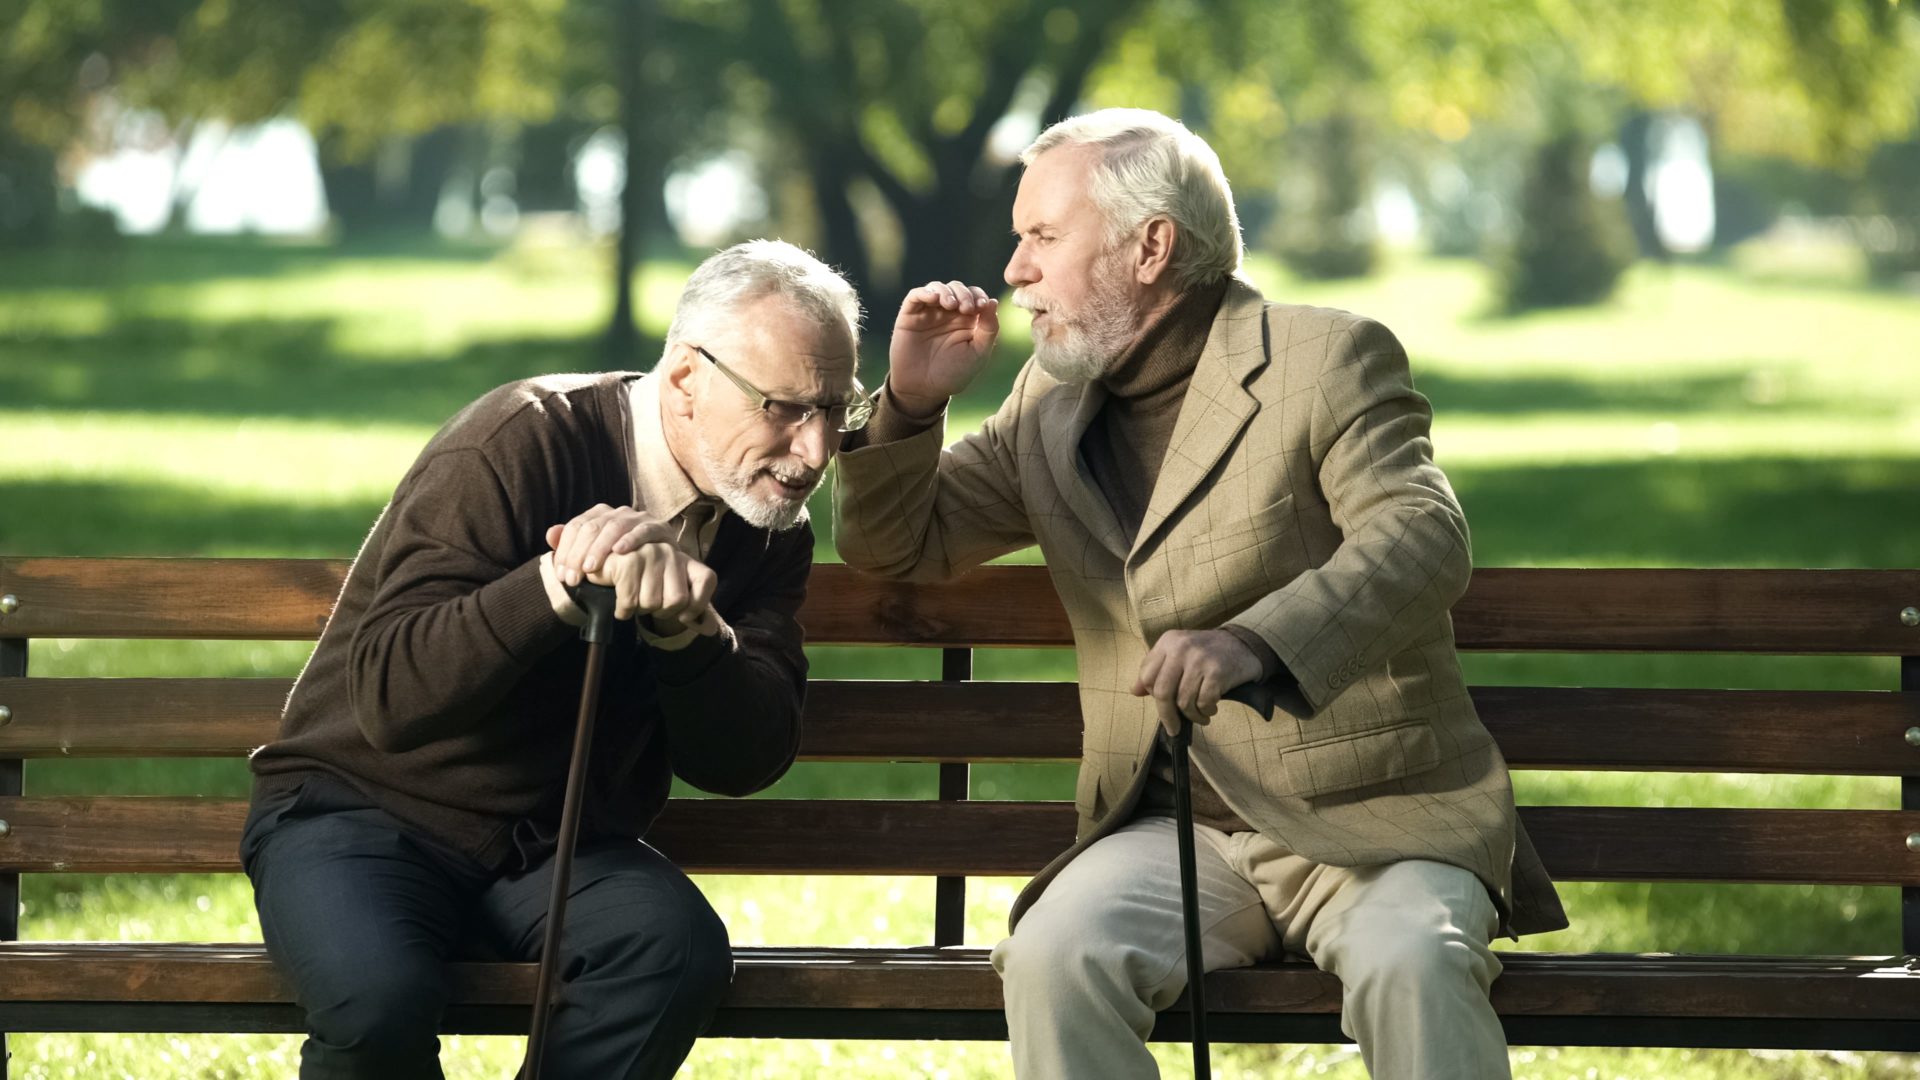 old man struggling to hear his friend